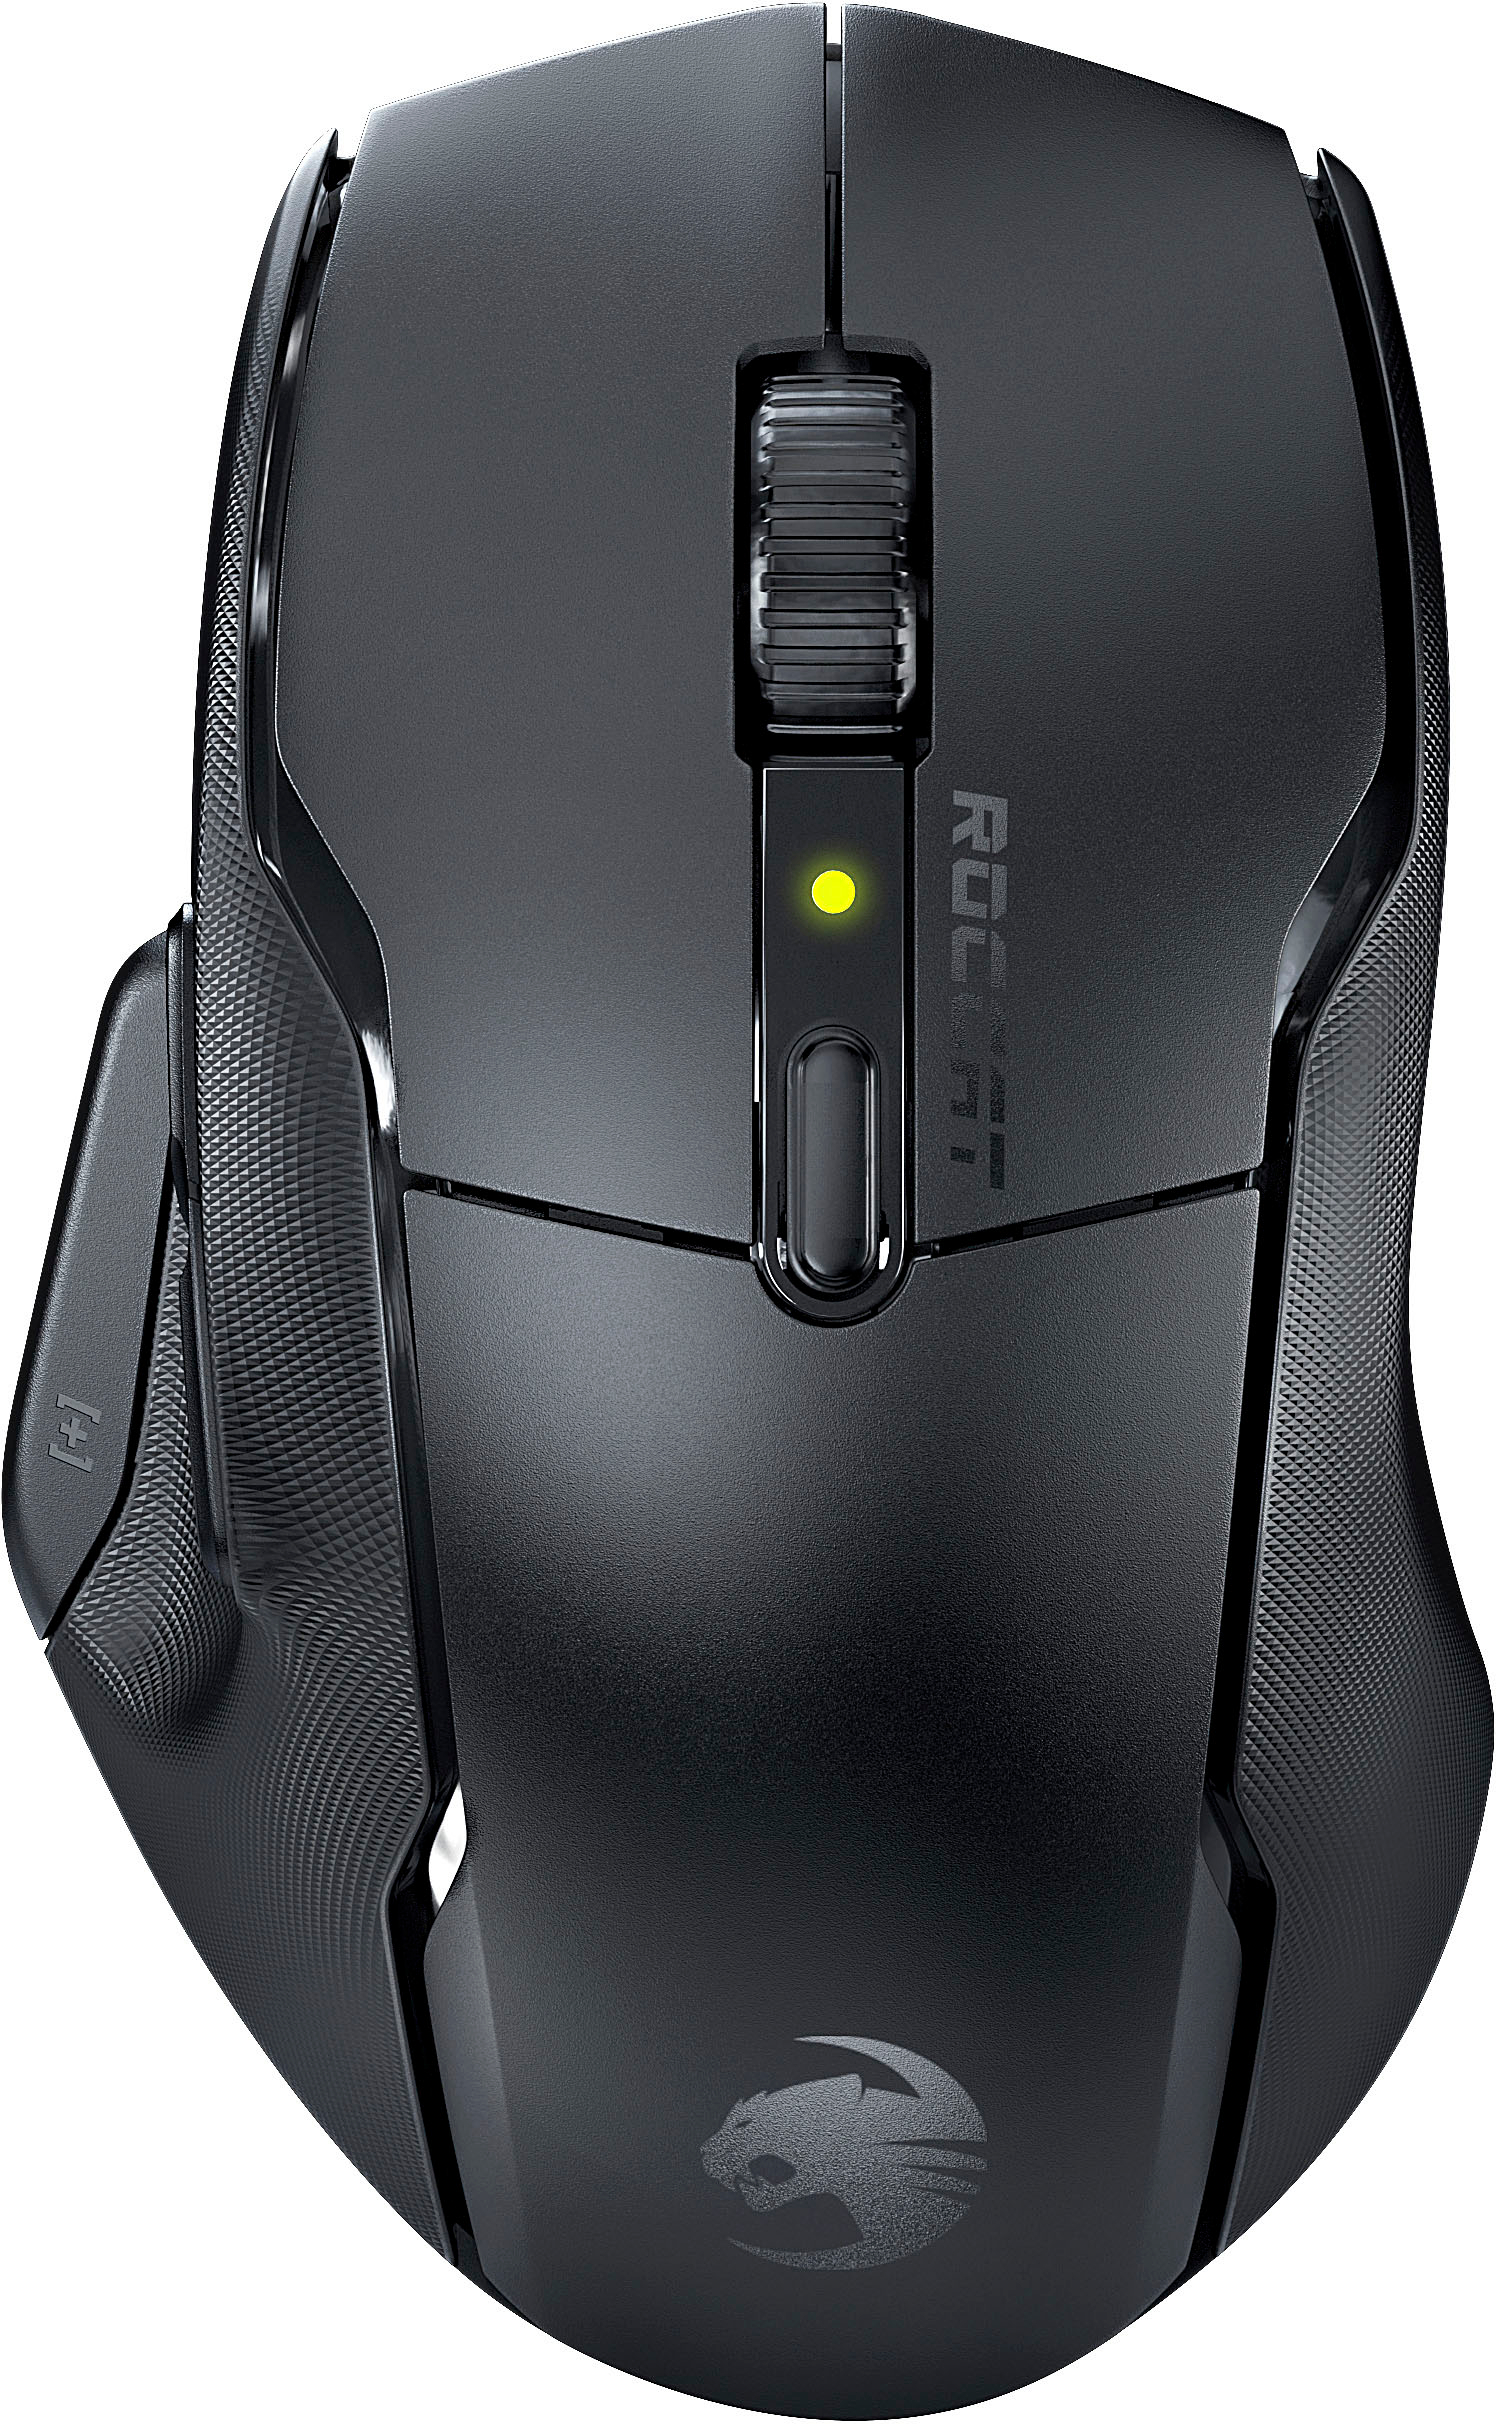 Kone Mouse Best ROC-11-450-01 with Programmable Ergonomic Design Black - Optical Wireless Gaming Button Air Buy ROCCAT